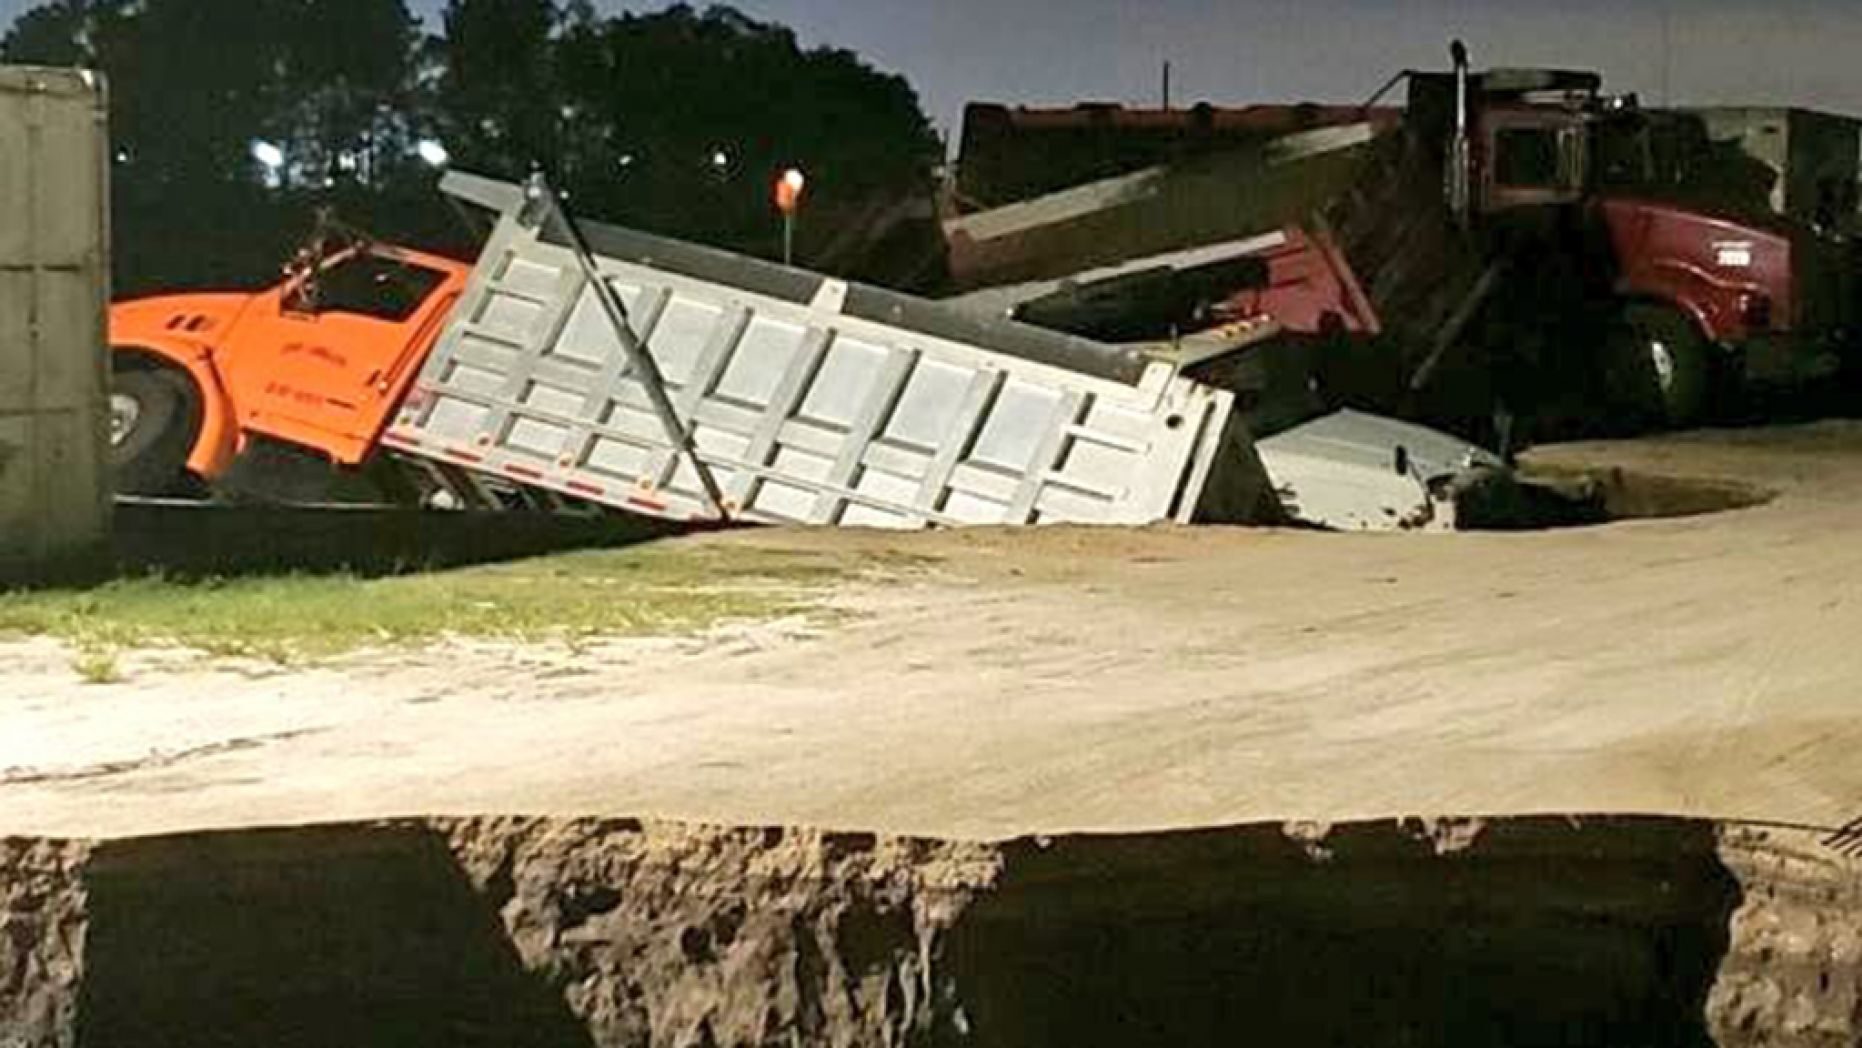 Trucks can be seen sticking out of a possible sinkhole in Florida early Wednesday.